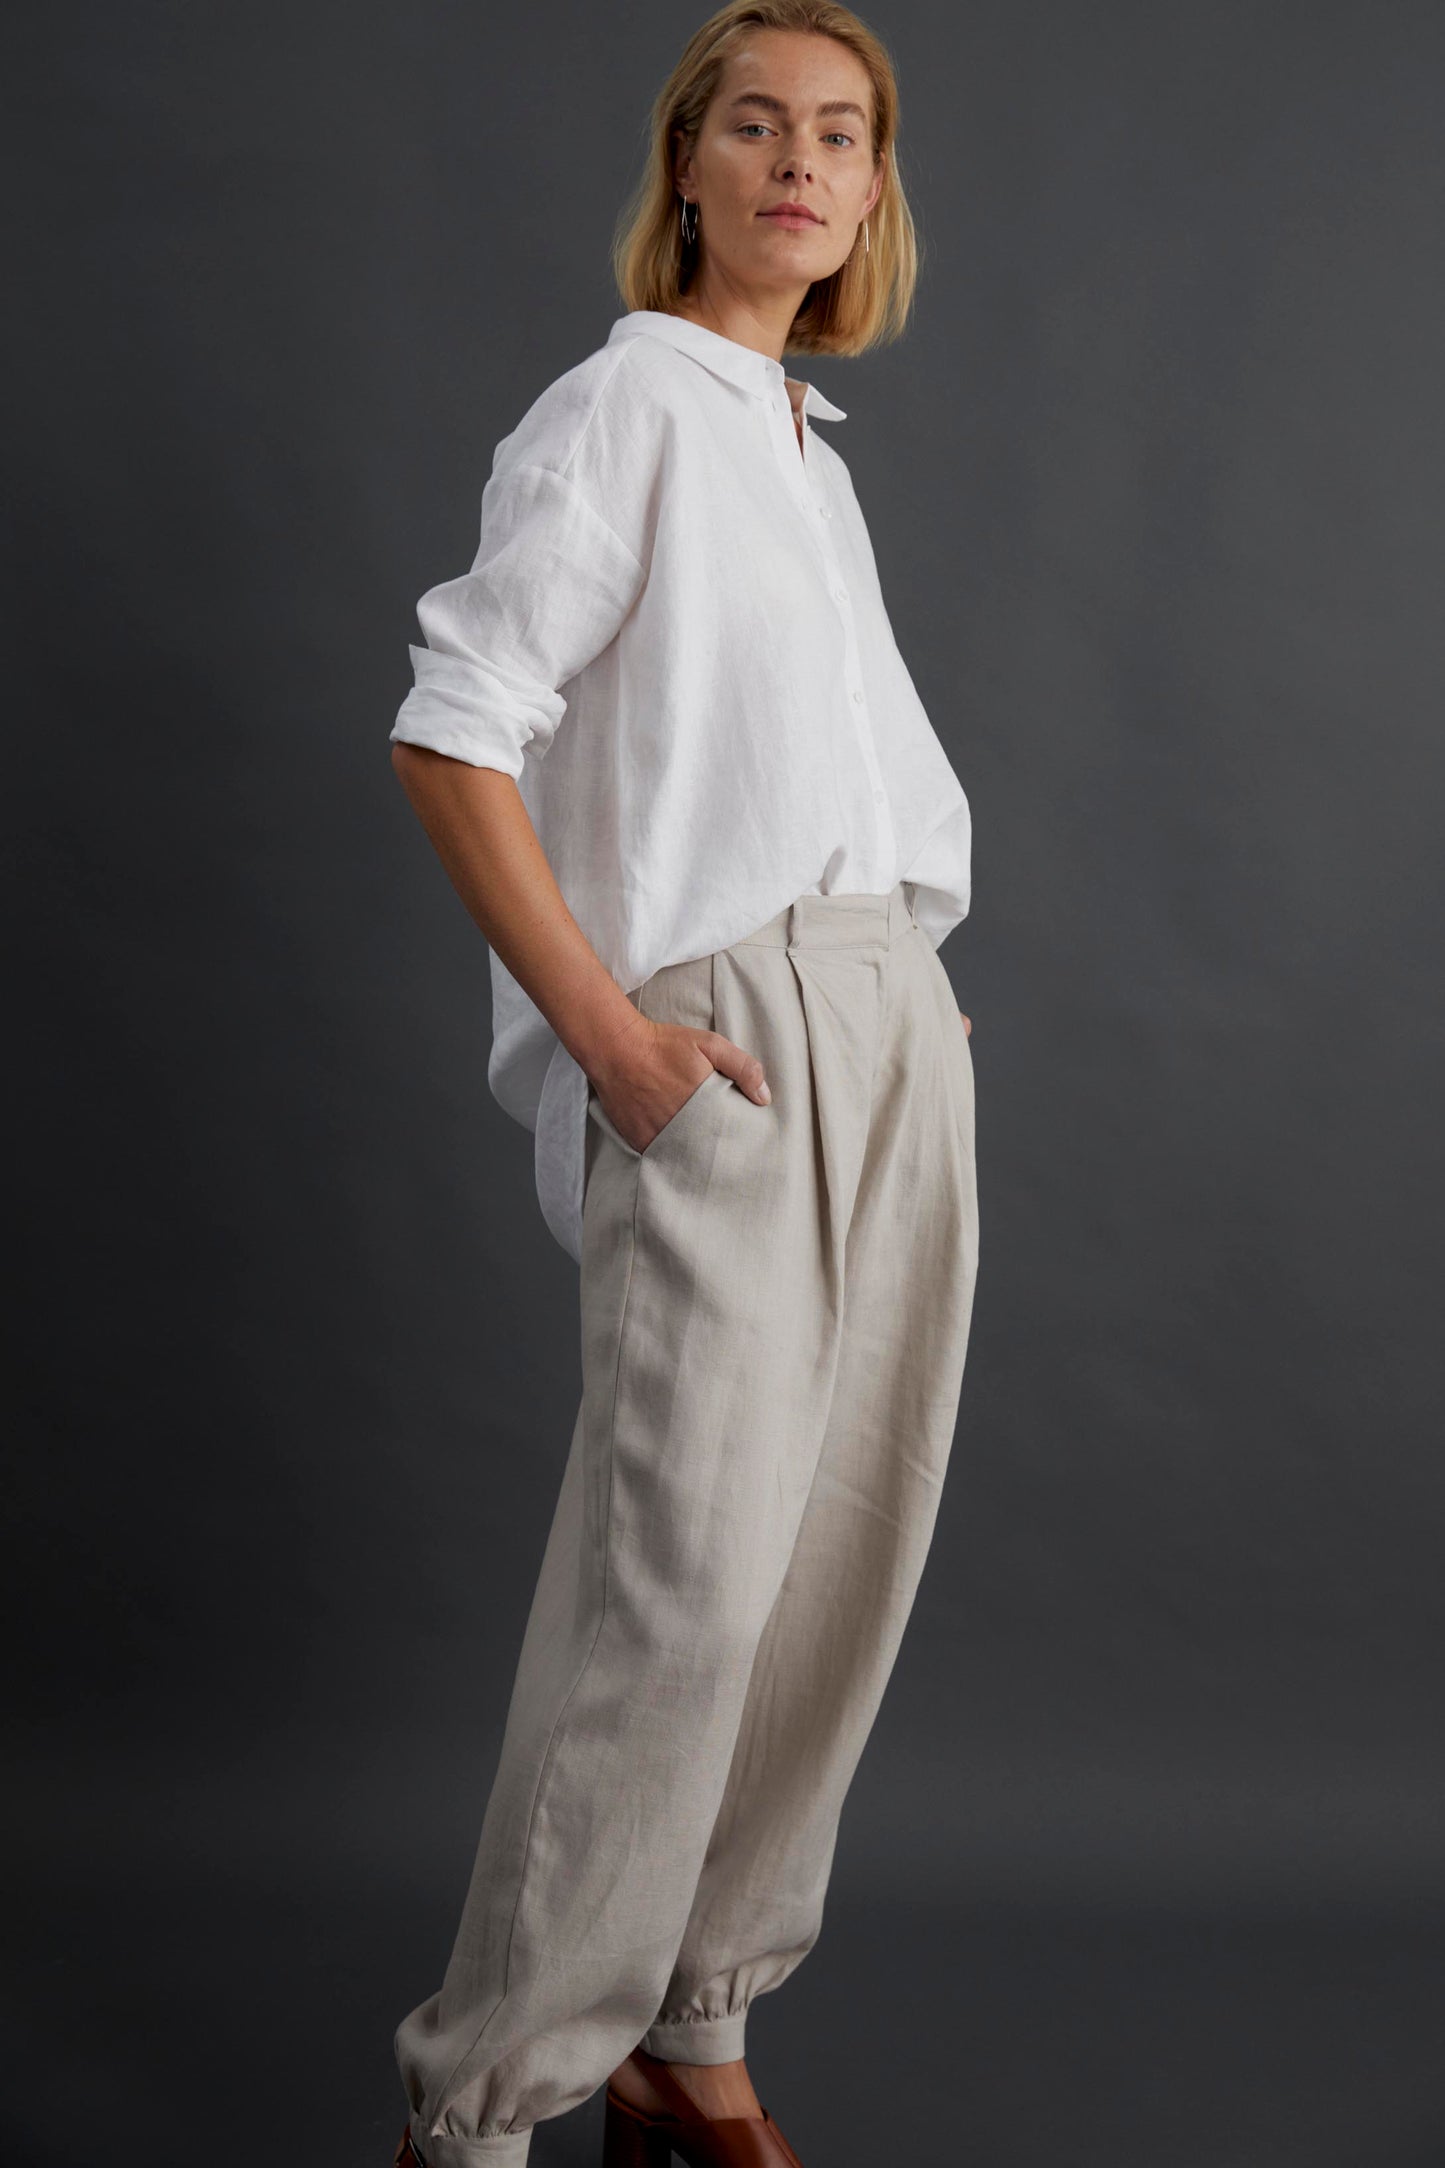 Yenna French Linen Shirt Model Front new Campaign | WHITE